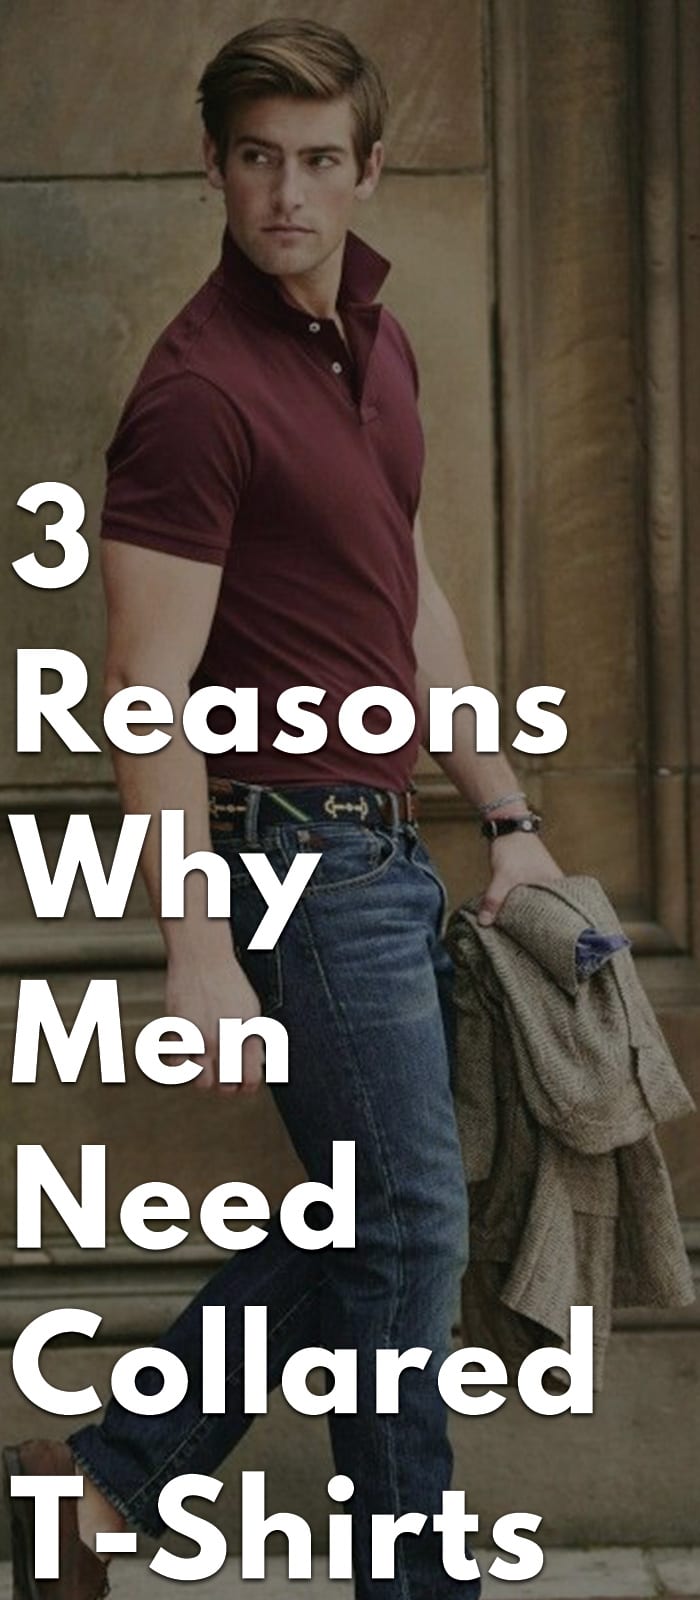 3-Reasons-Why-Men-Need-Collared-T-Shirts